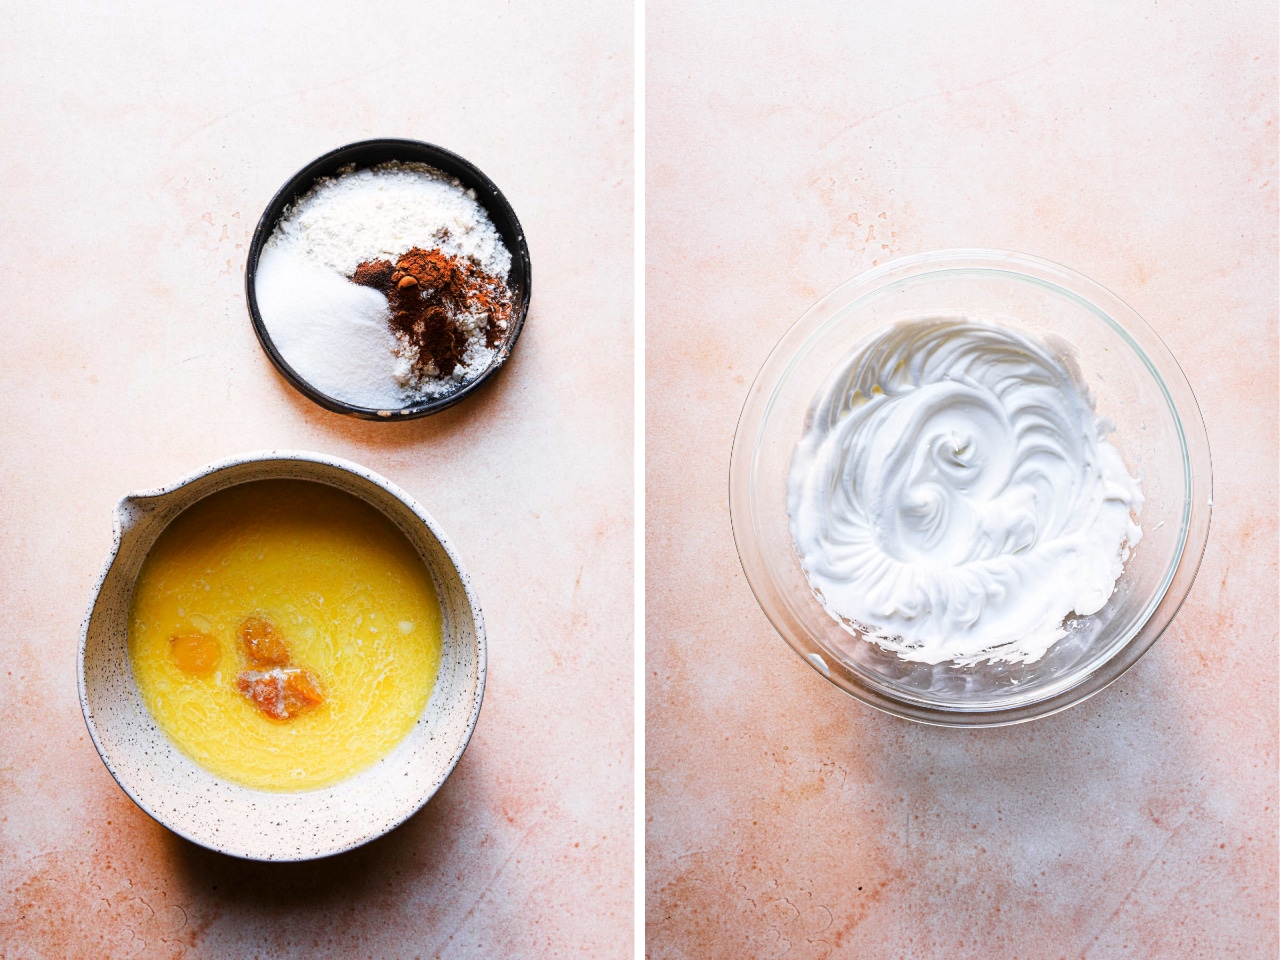 A side-by-side picture shows, on the left, a mixing bowl filled with liquid ingredients and another bowl with dry ingredients. The photo on the white shows a mixing bowl with whipped egg whites.